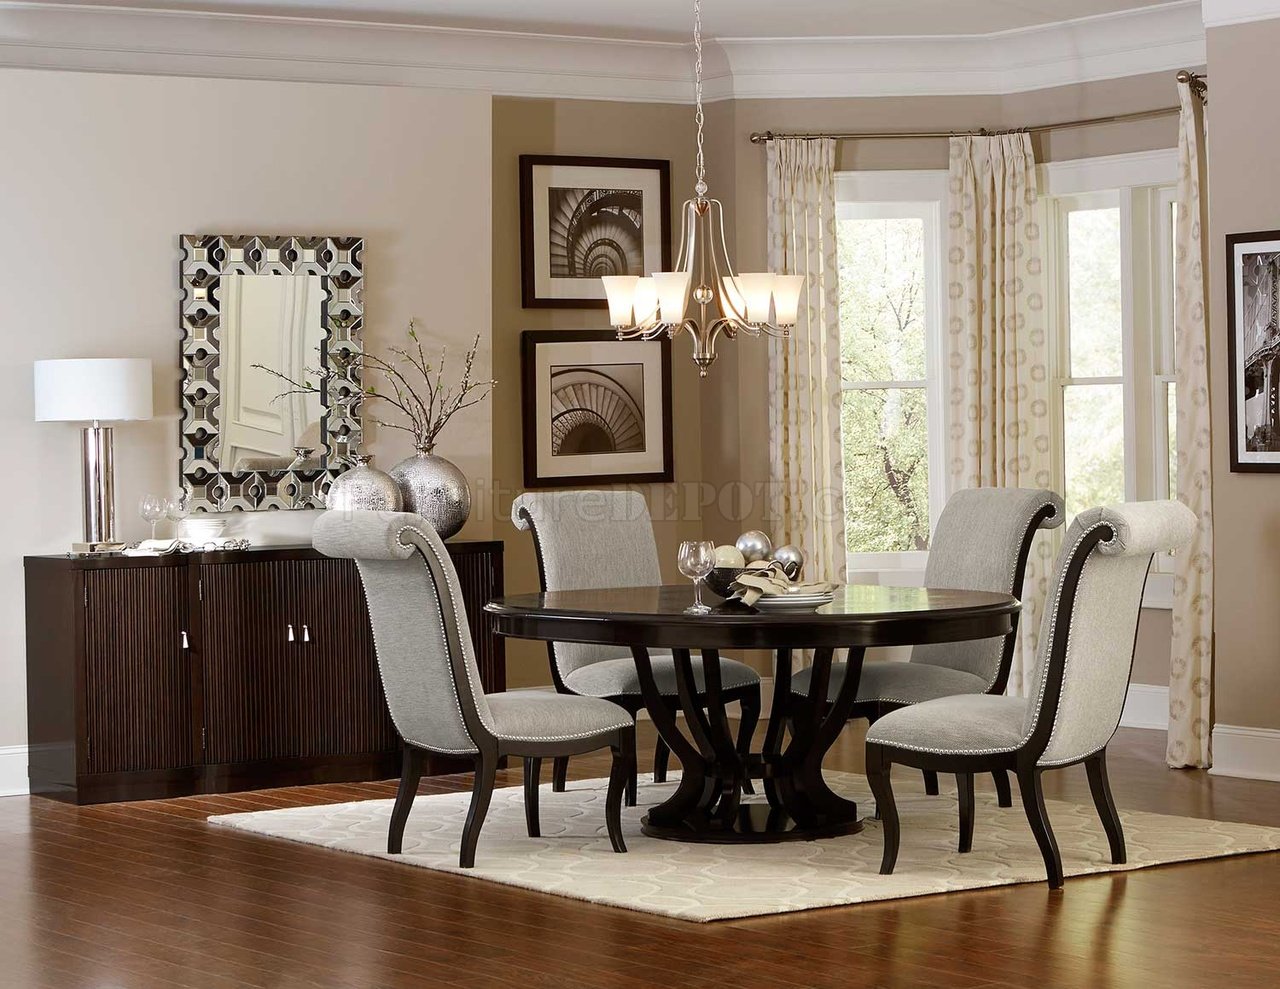 rent a center dining room